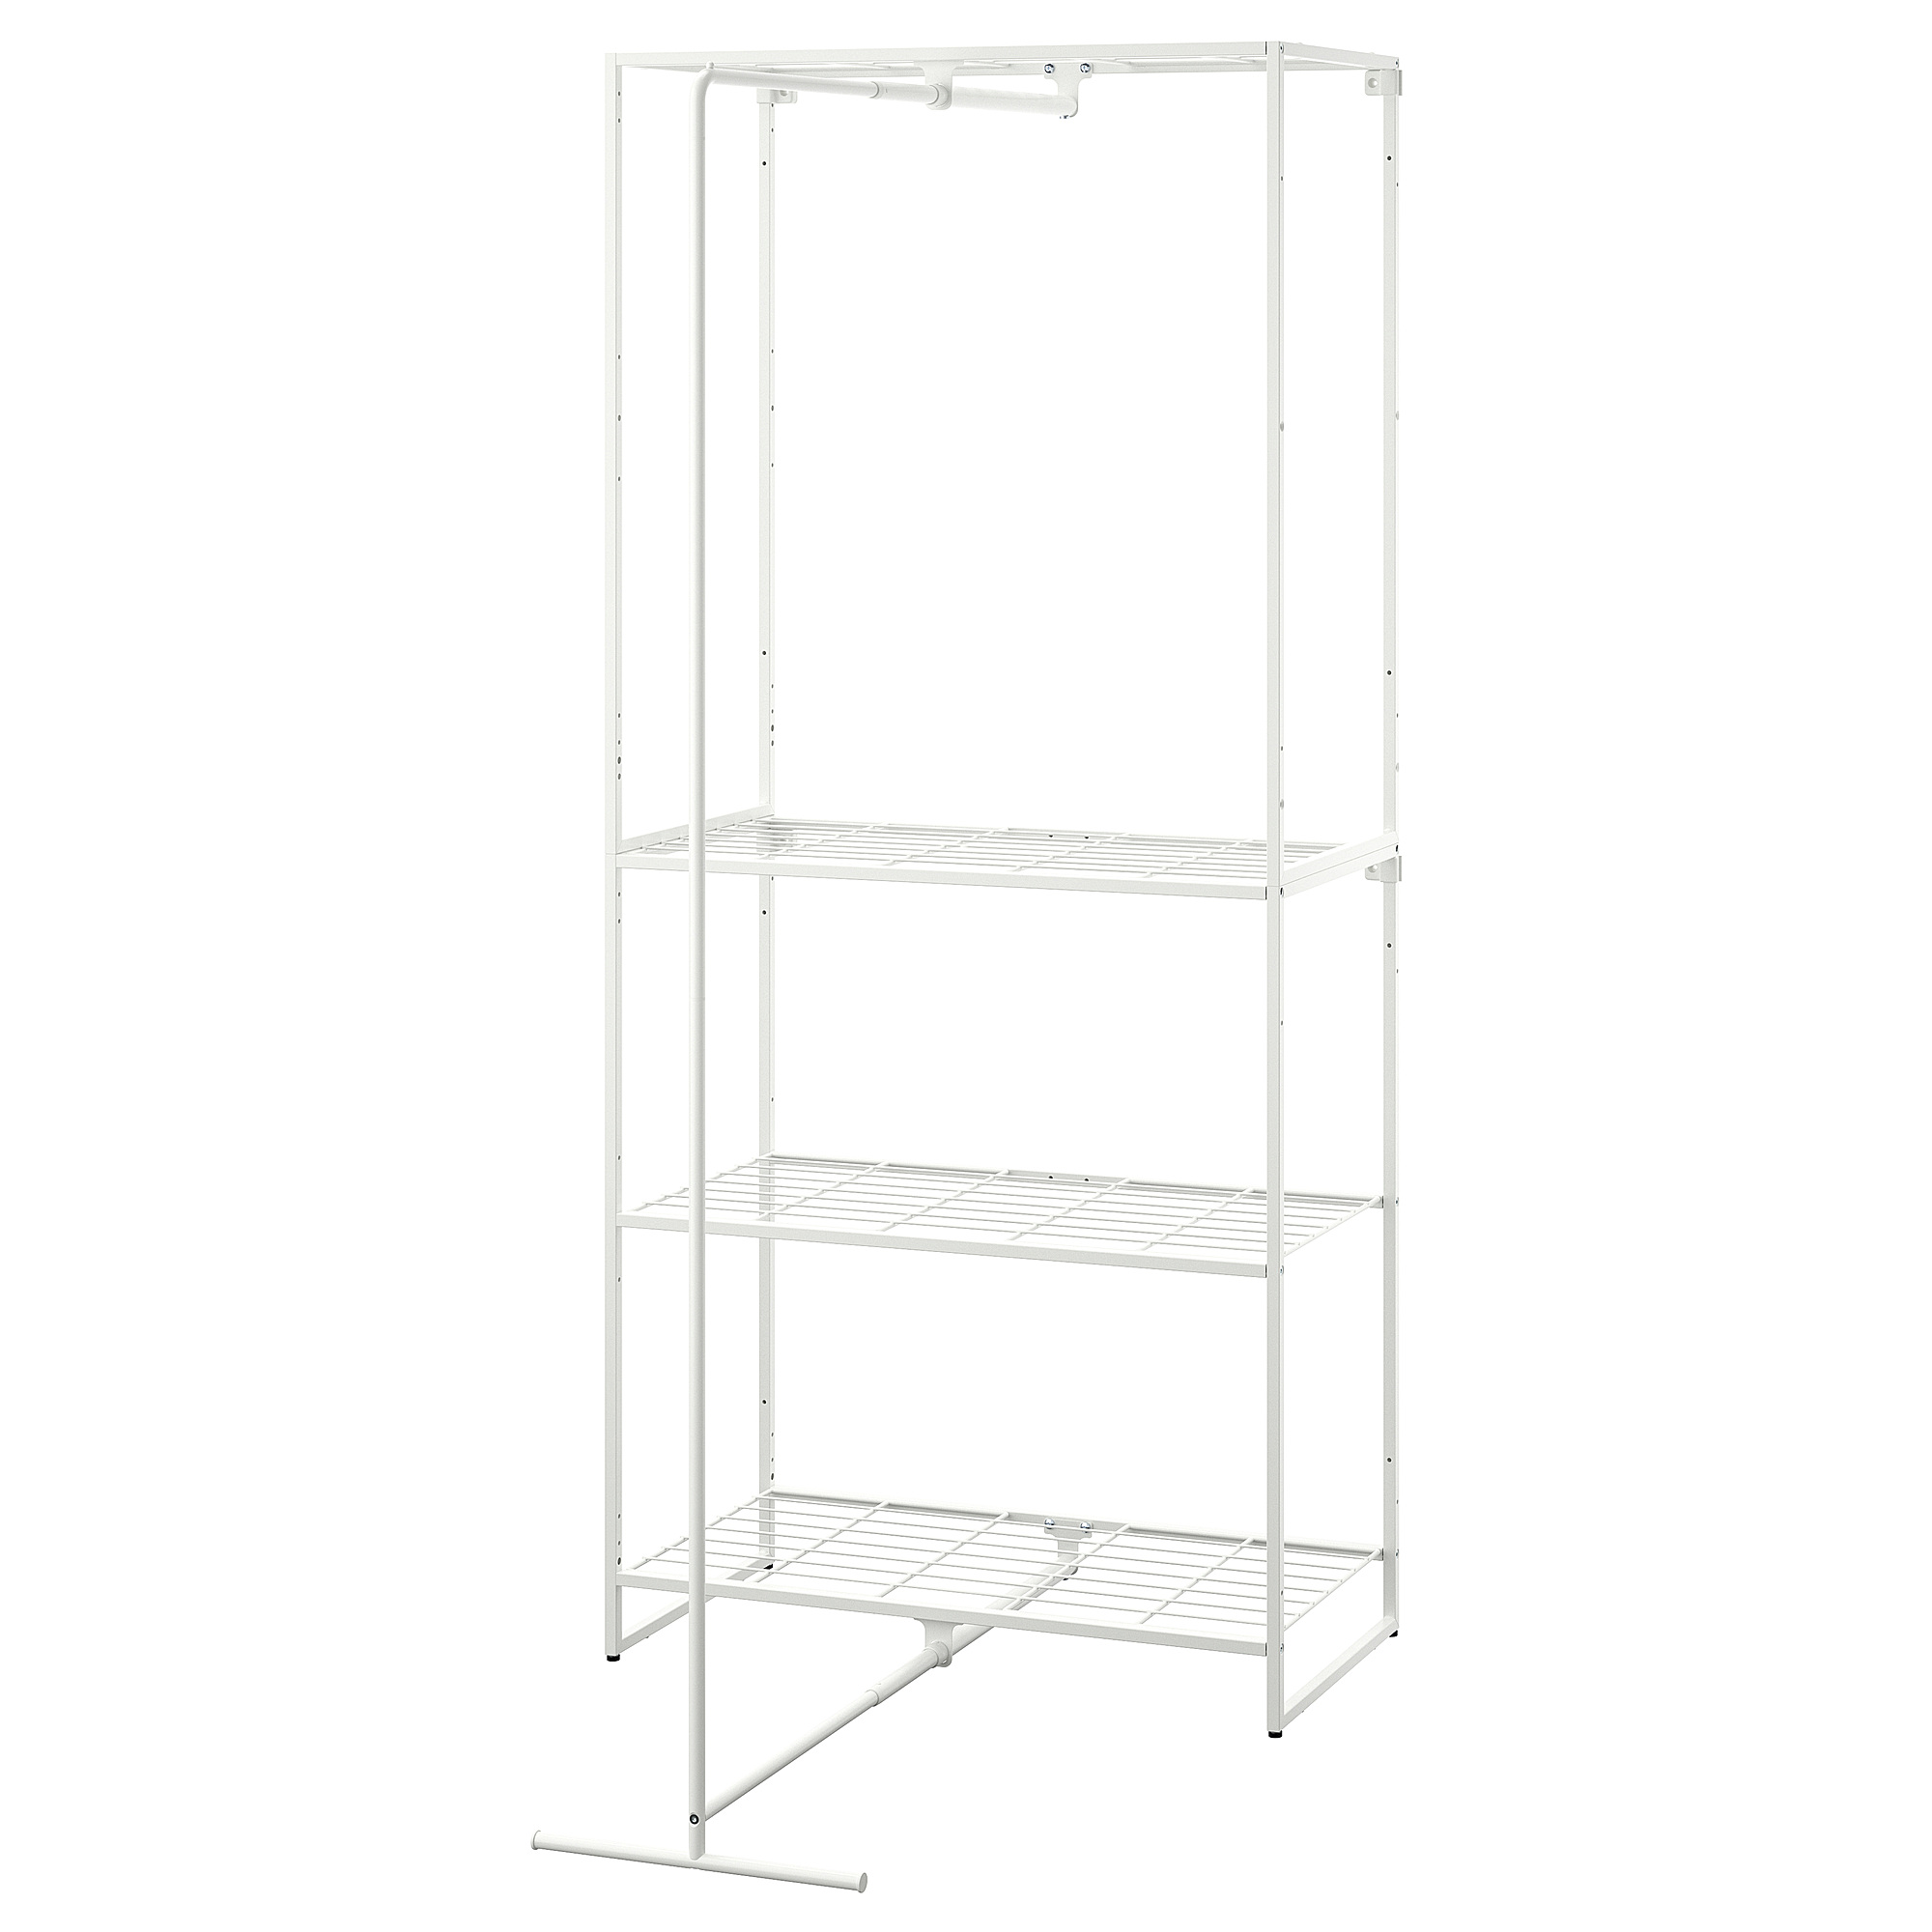 JOSTEIN shelving unit with drying rack